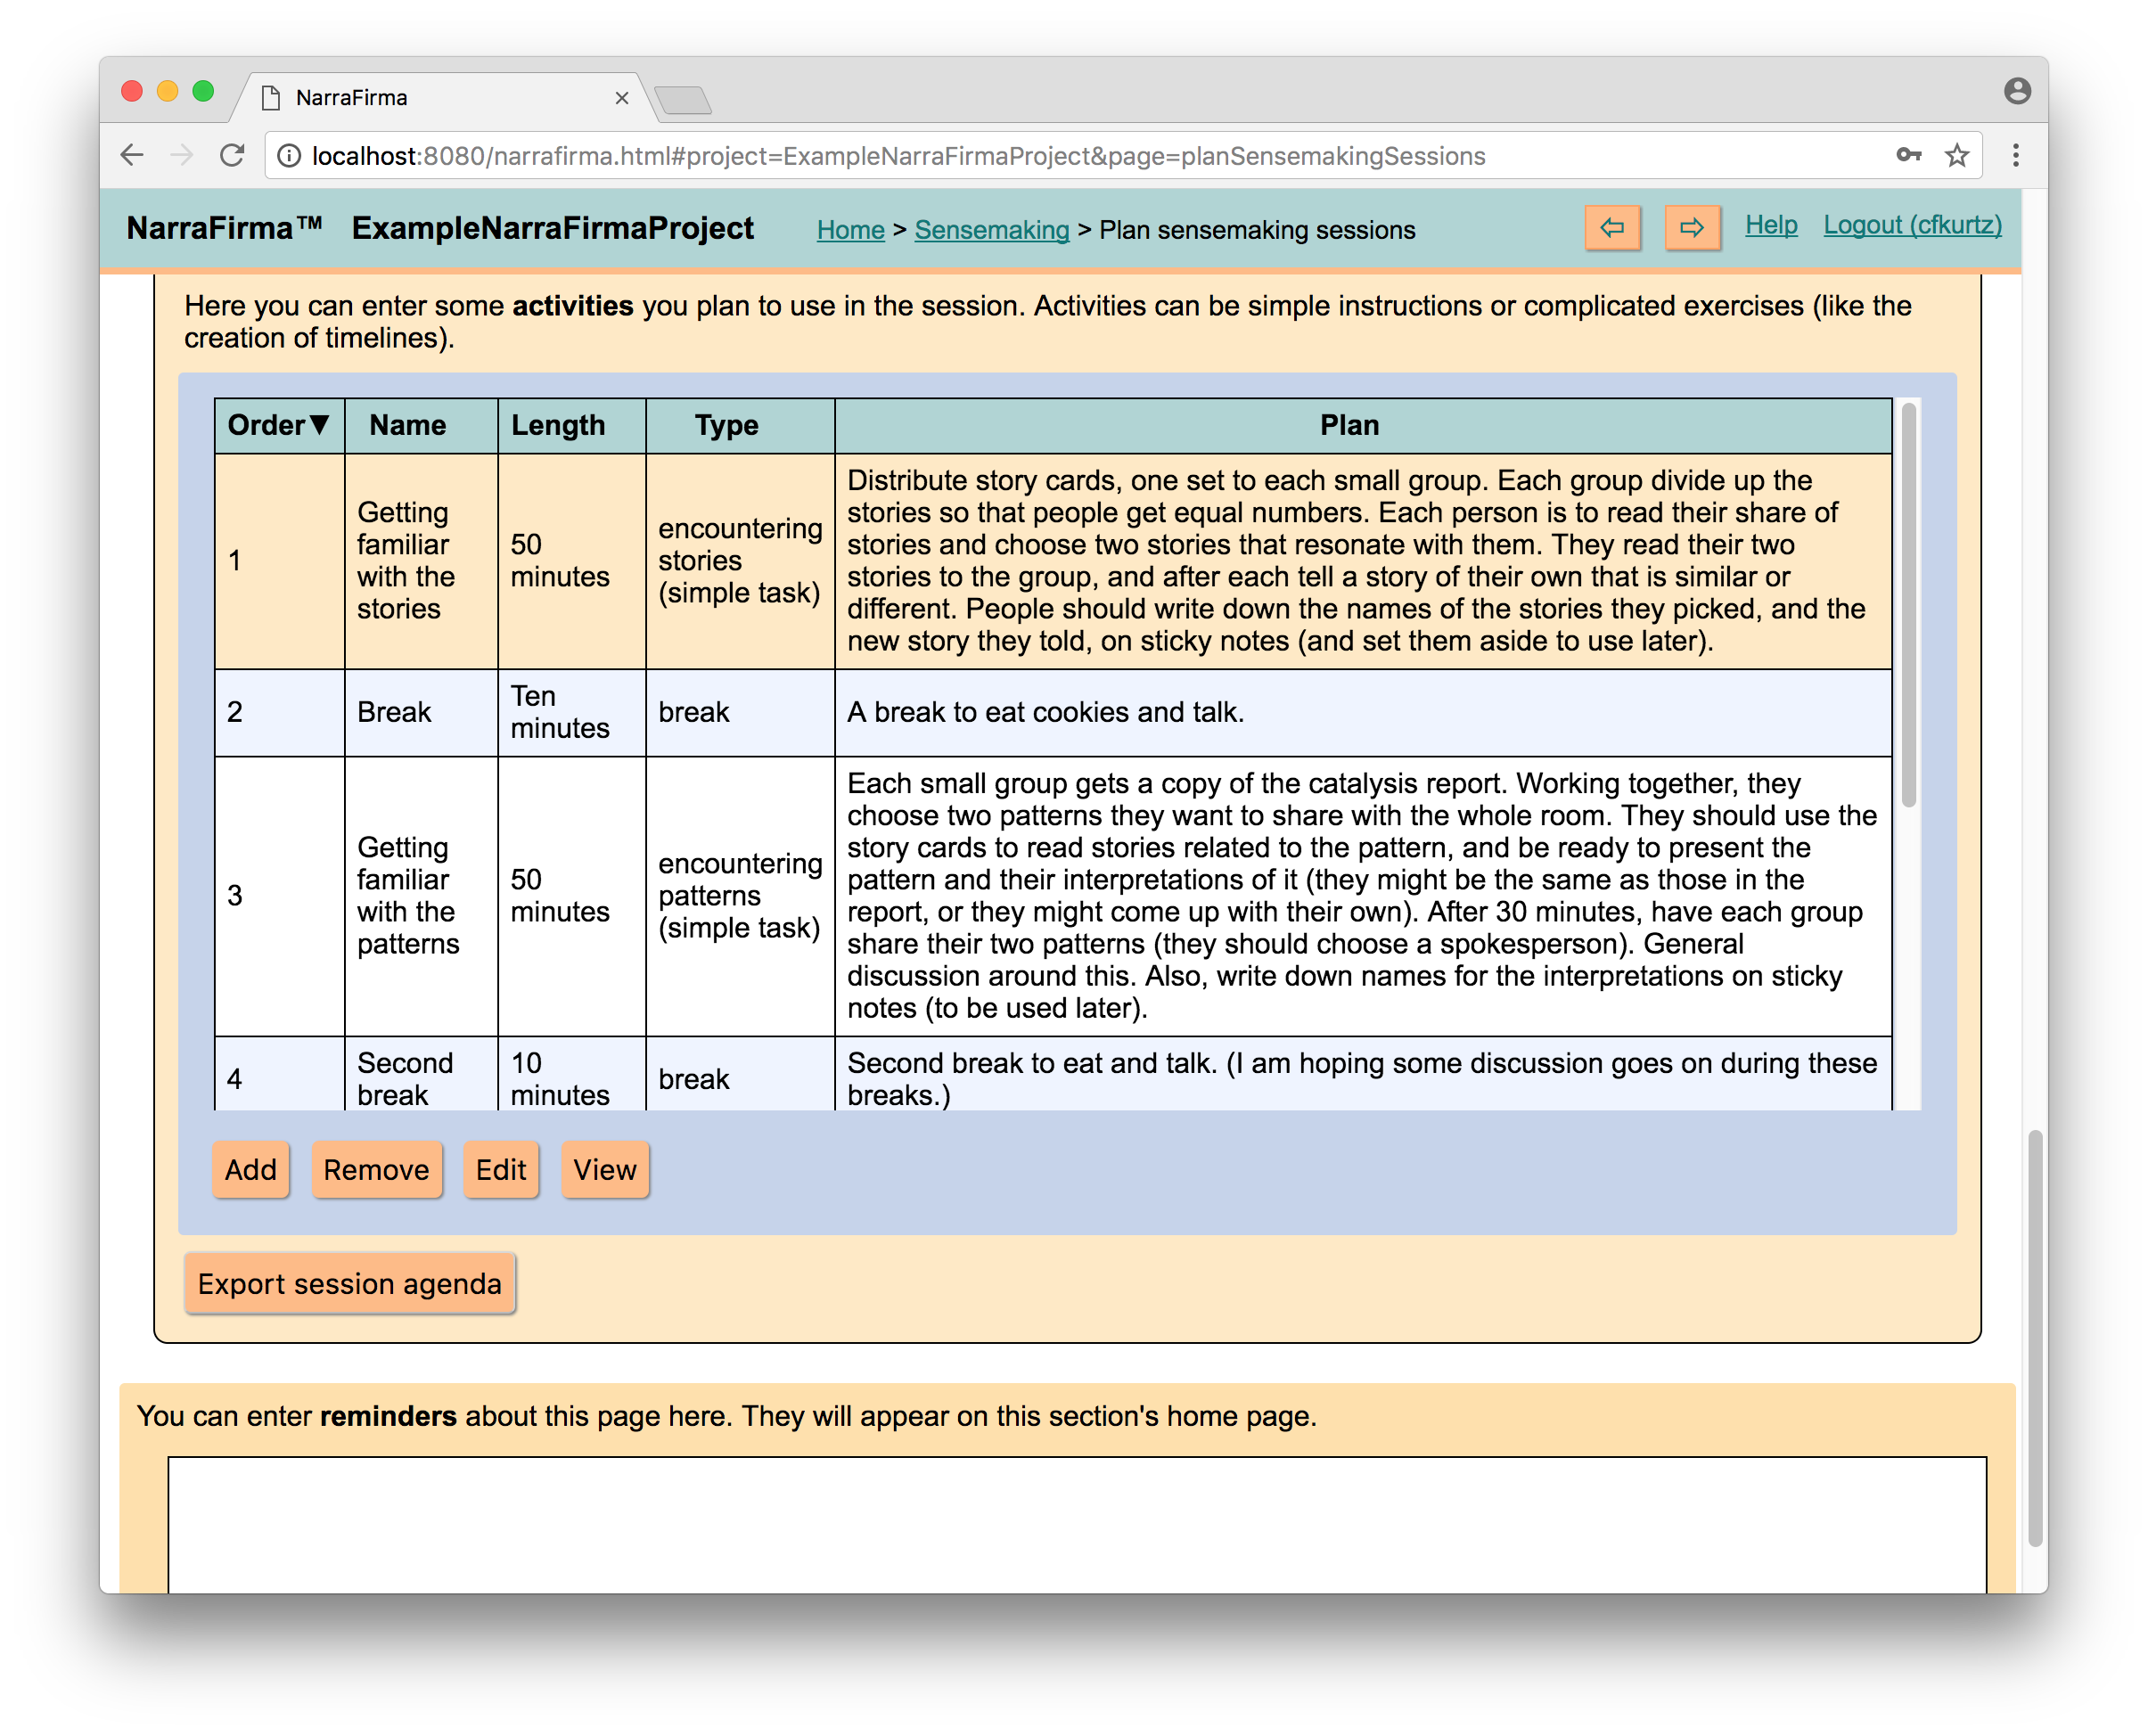 This is the main page of NarraFirma. The sections of the software (and the phases of PNI) are shown in the diagram. Clicking on any of these buttons  leads to that section.